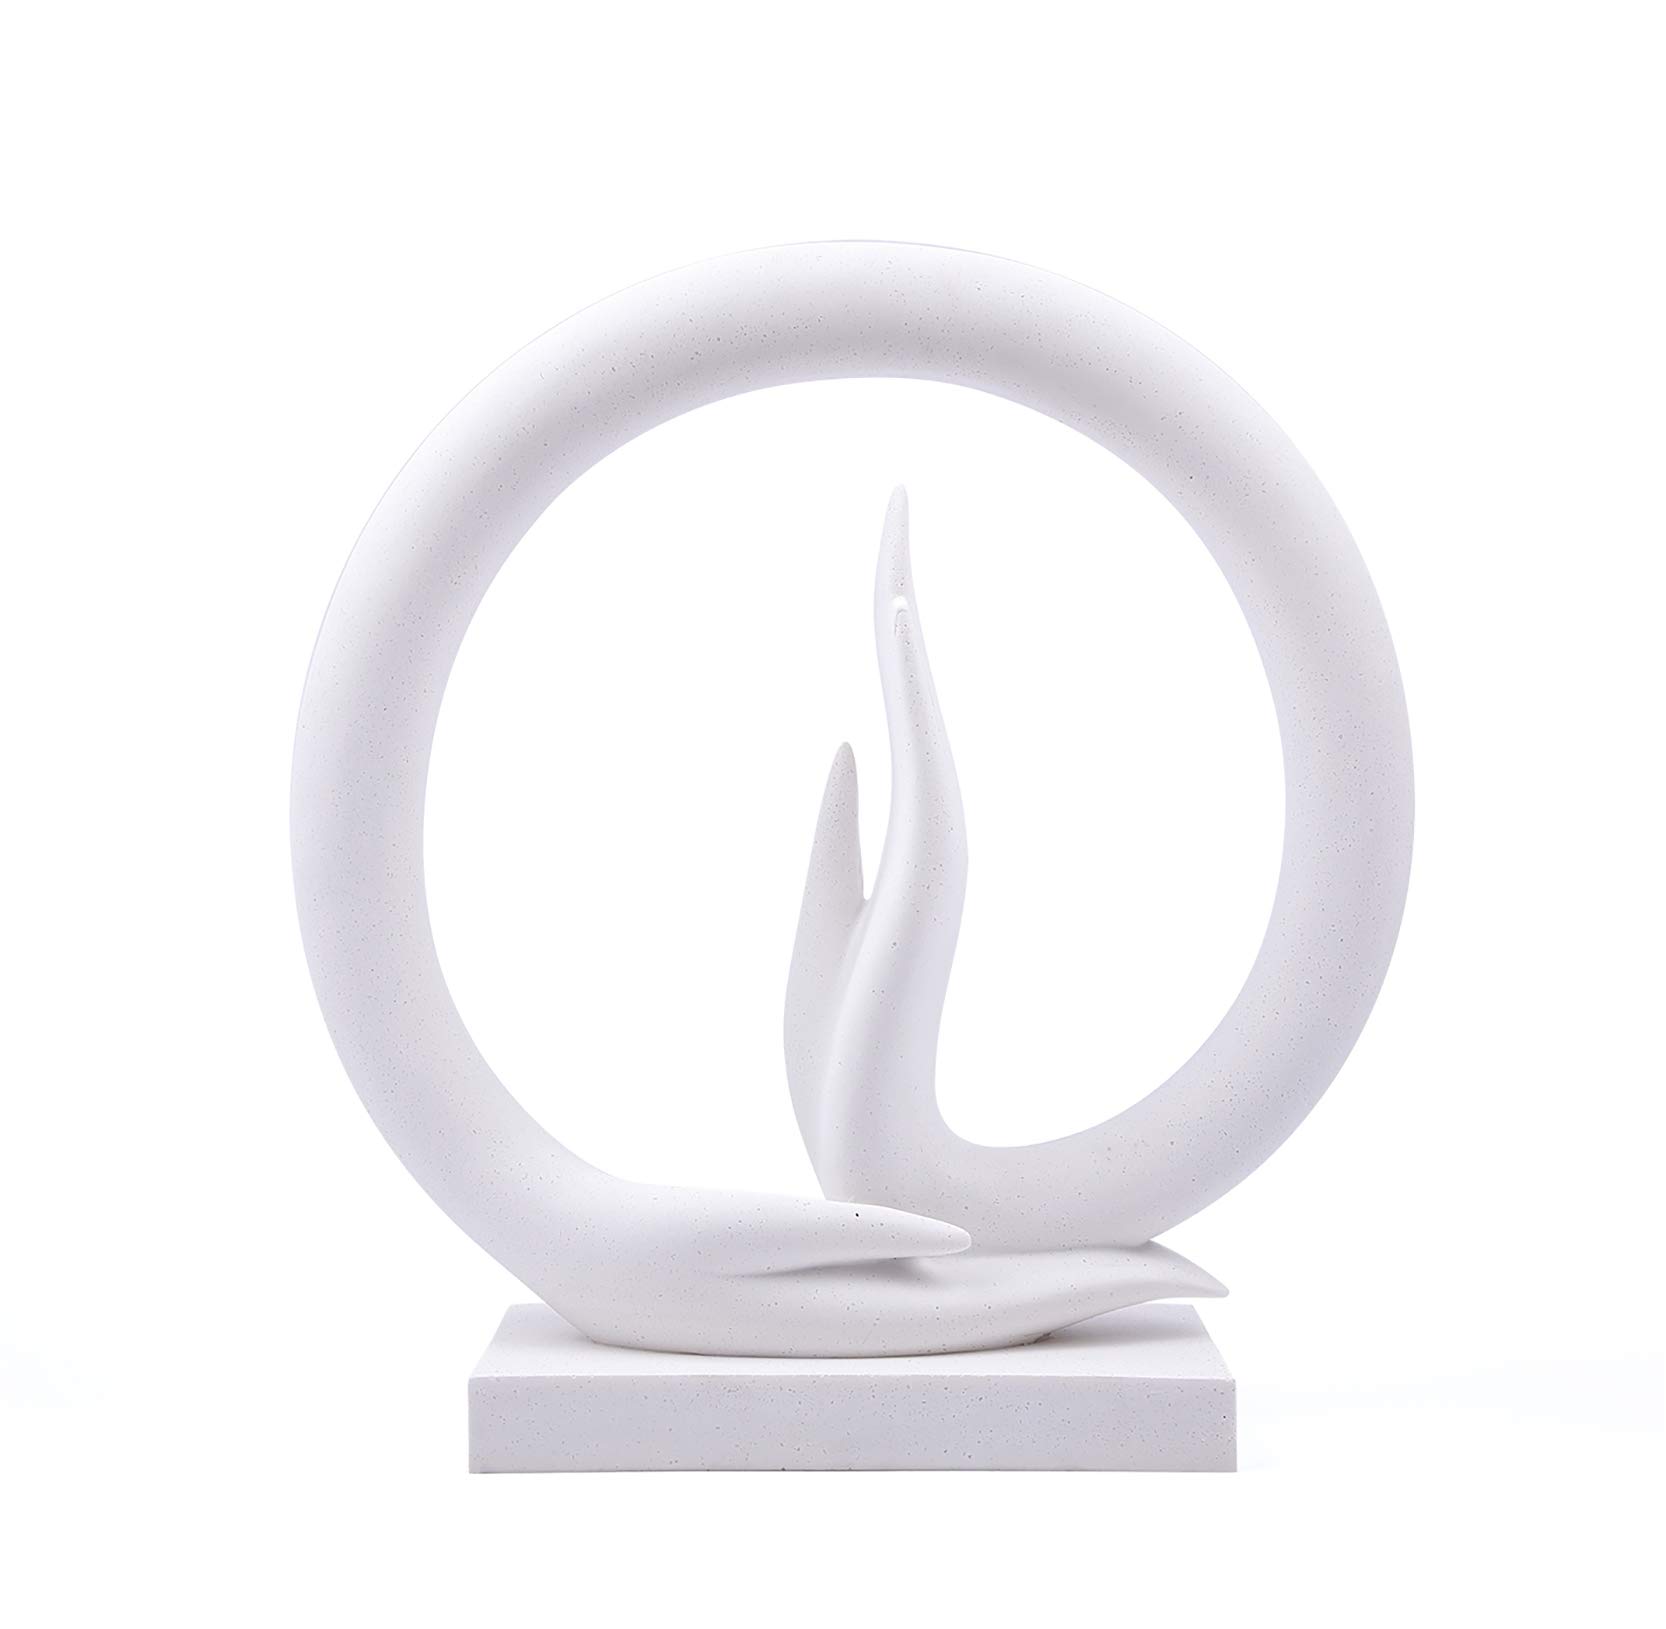 Carefree Fish Starry White Sandstone Buddha Hand Statue Yoga Decor The Art of Minimalism Valuable Collection (Solid 6.6 Pounds)